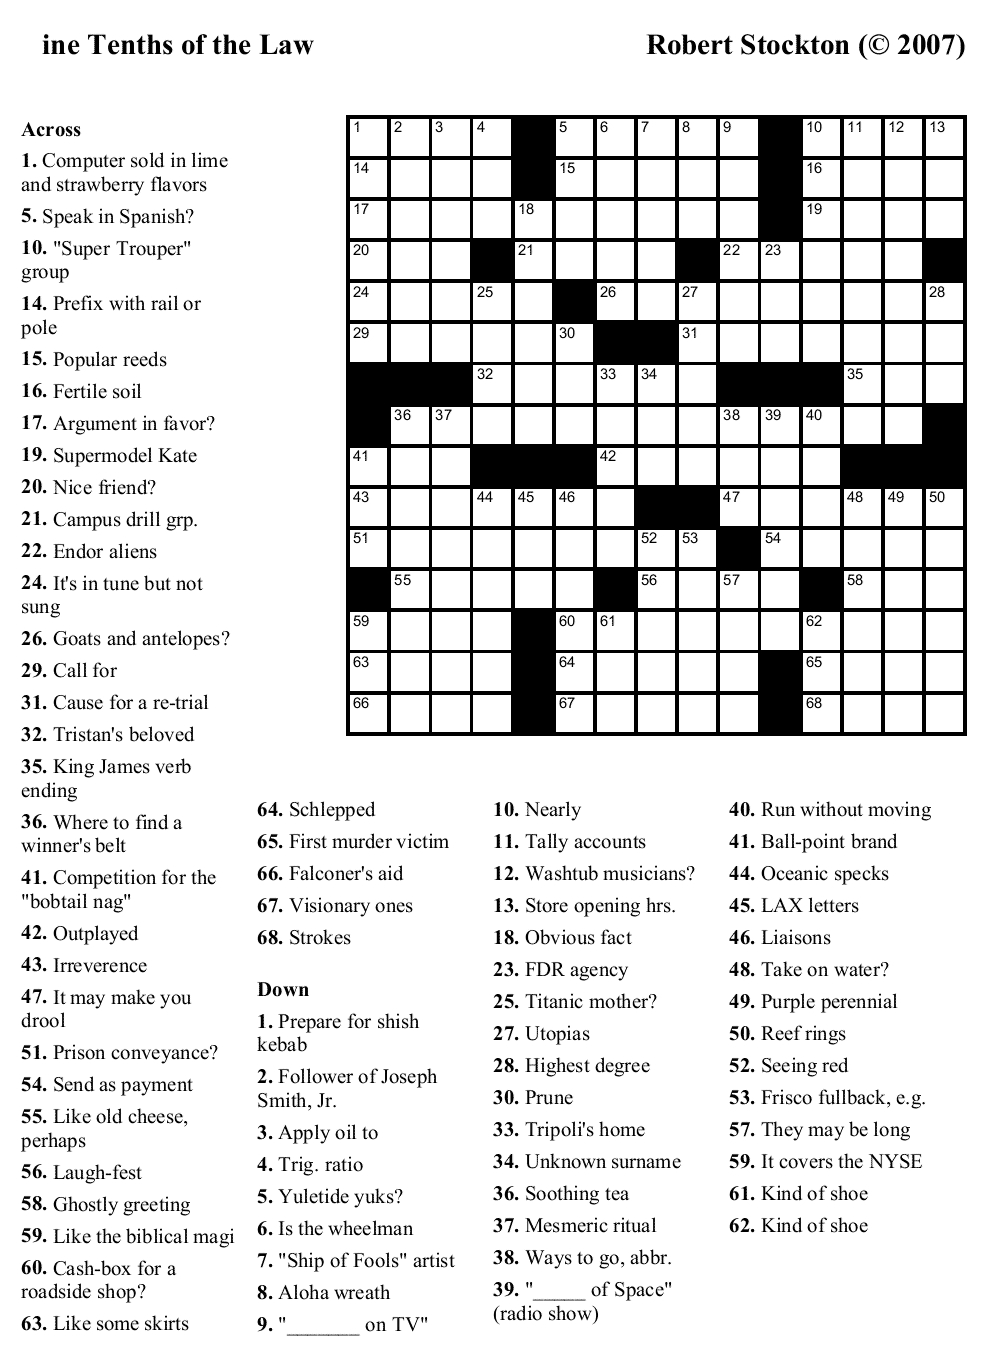 Crossword Puzzles Printable - Yahoo Image Search Results | Crossword - Usa Today Printable Crossword Puzzles 2018